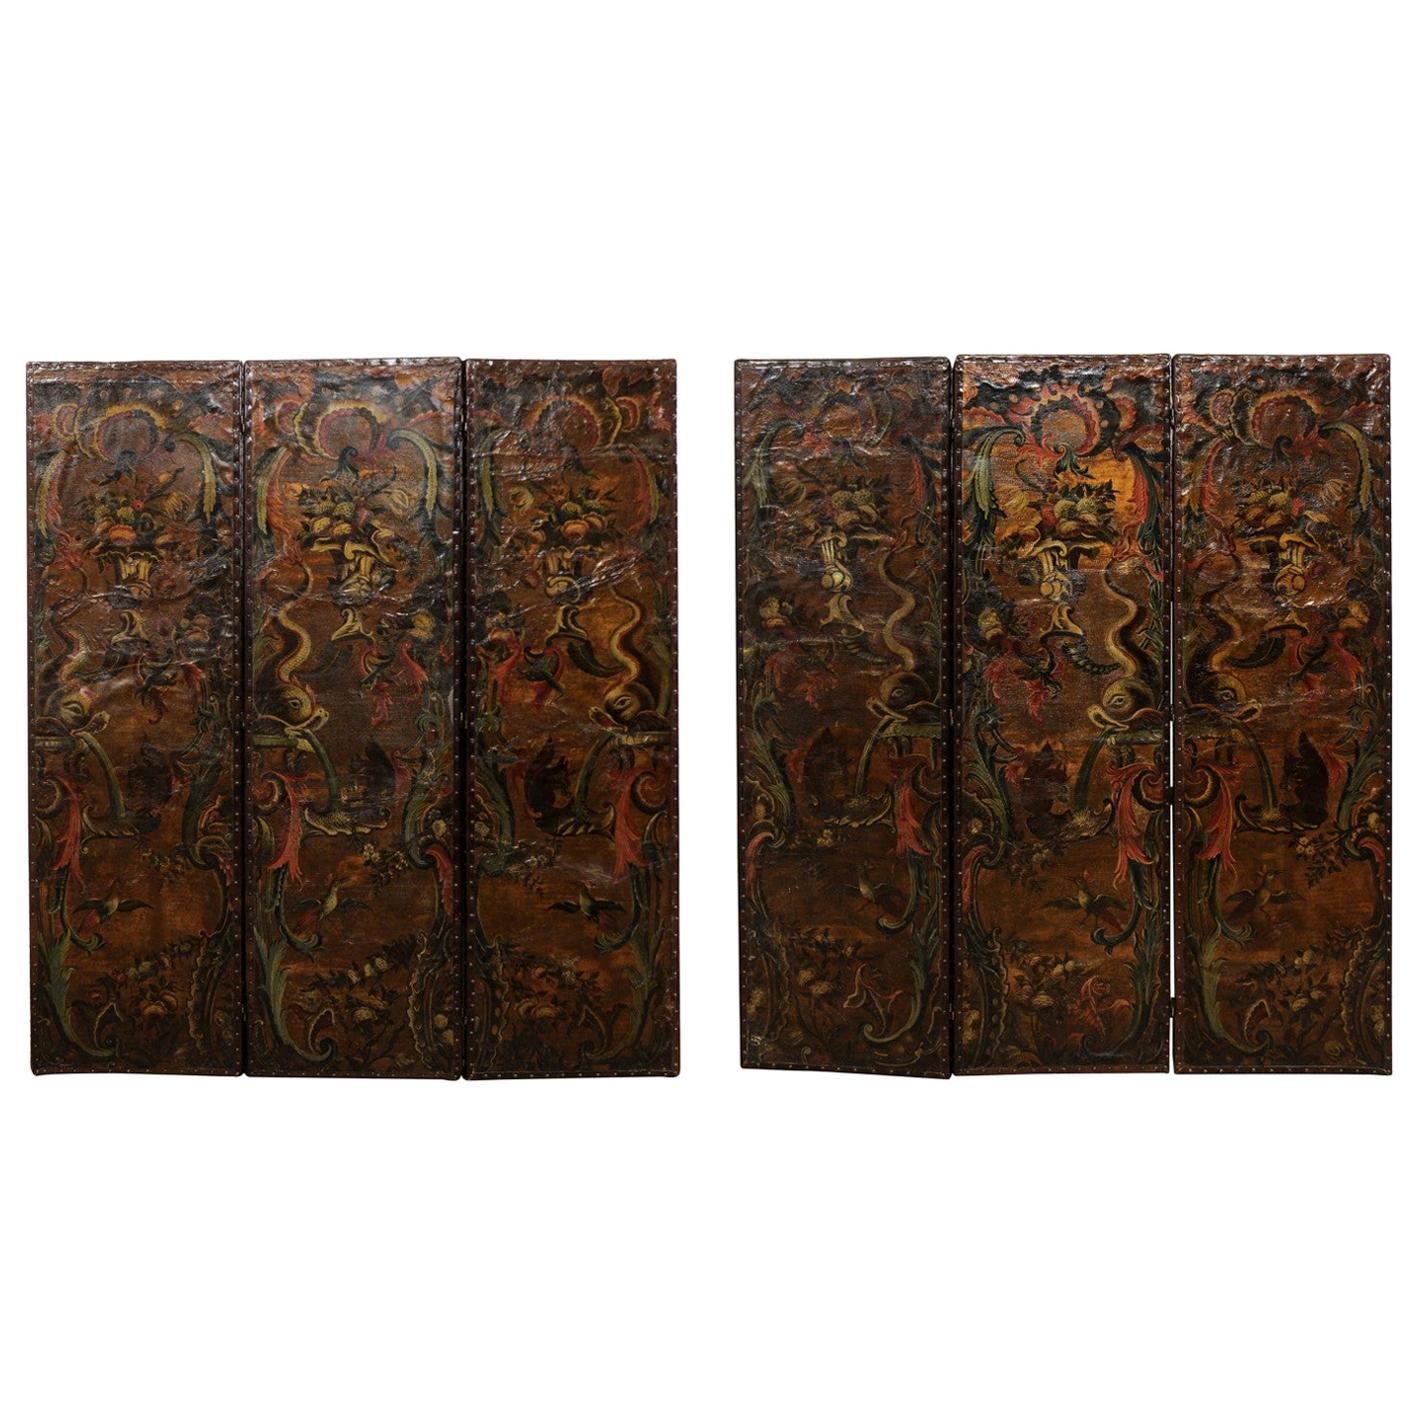 Italian Pair of Leather Embossed Room Dividers, Turn of the 17th & 18th Century For Sale